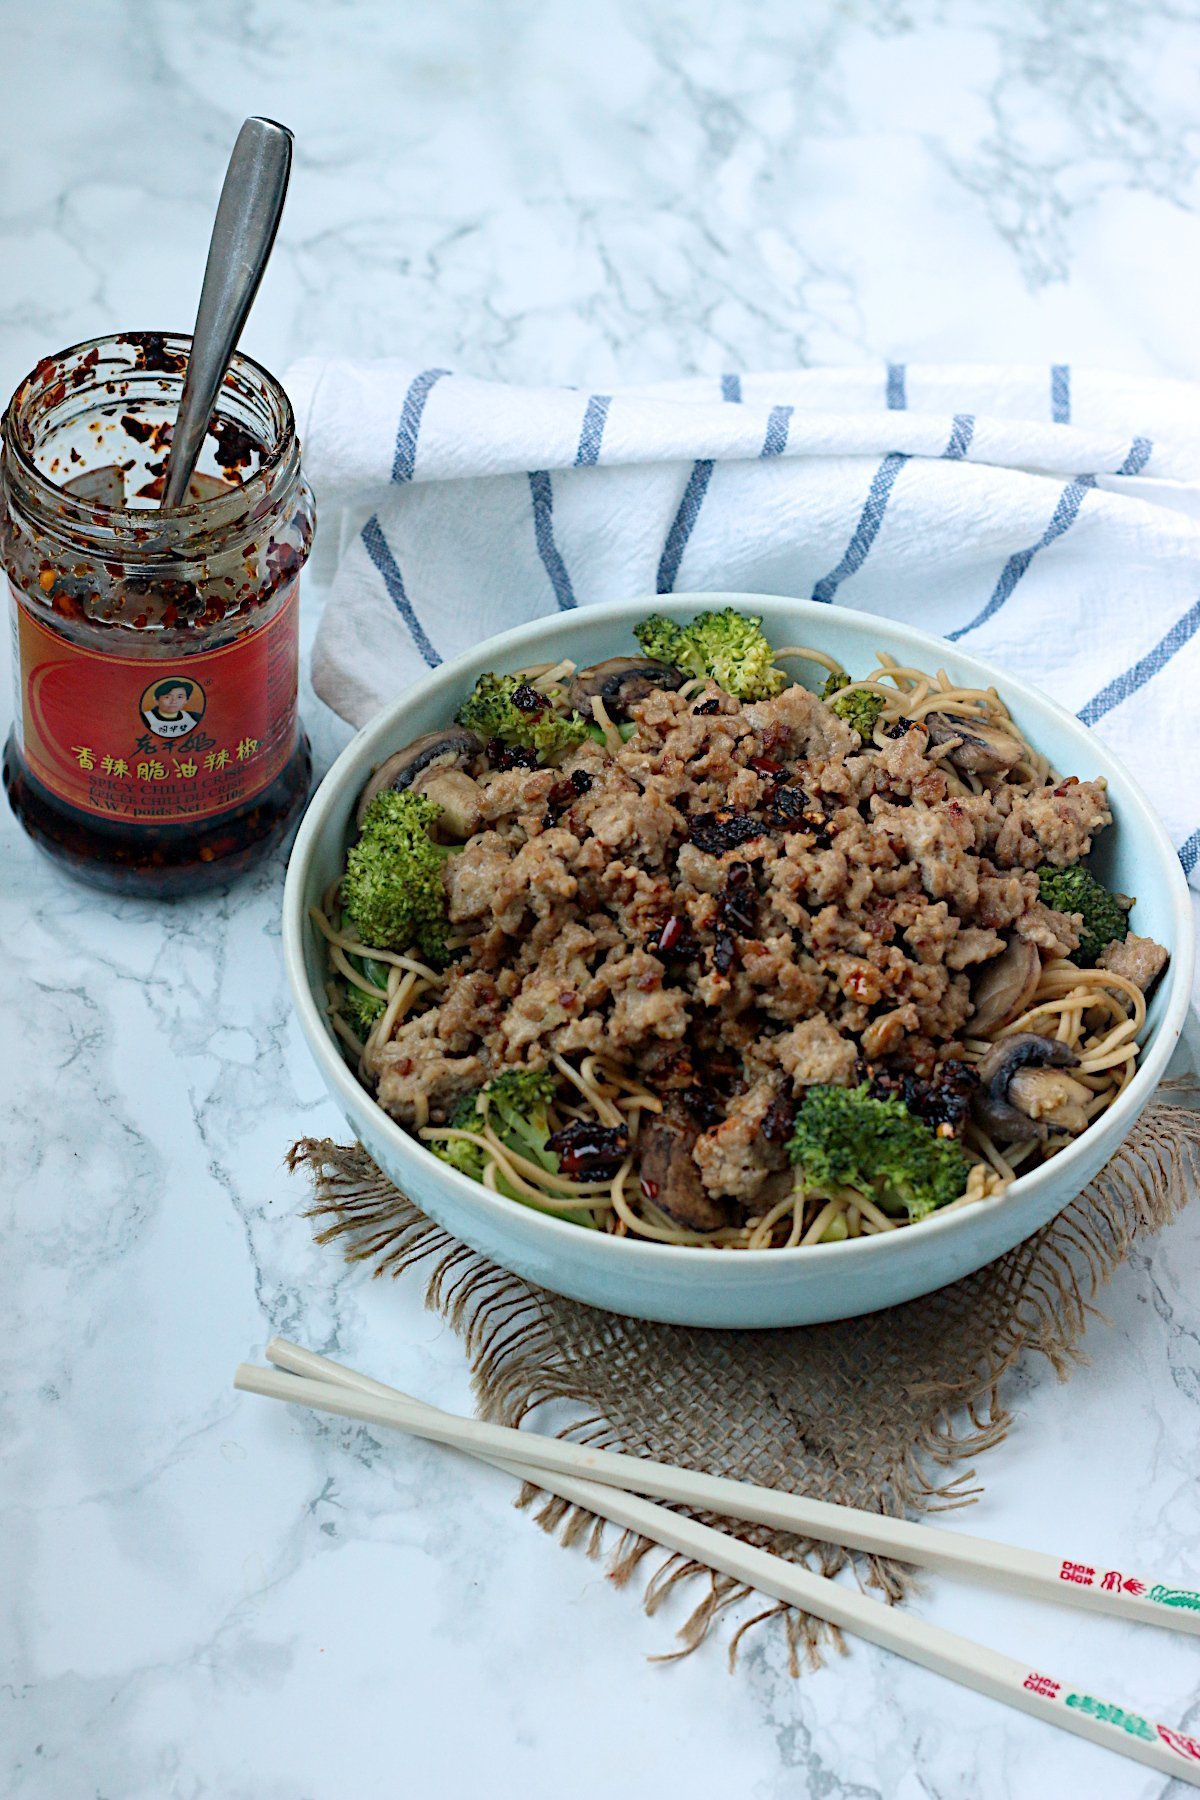 One-Pan Pork and Broccoli Noodle Bowl garnished with chili oil.